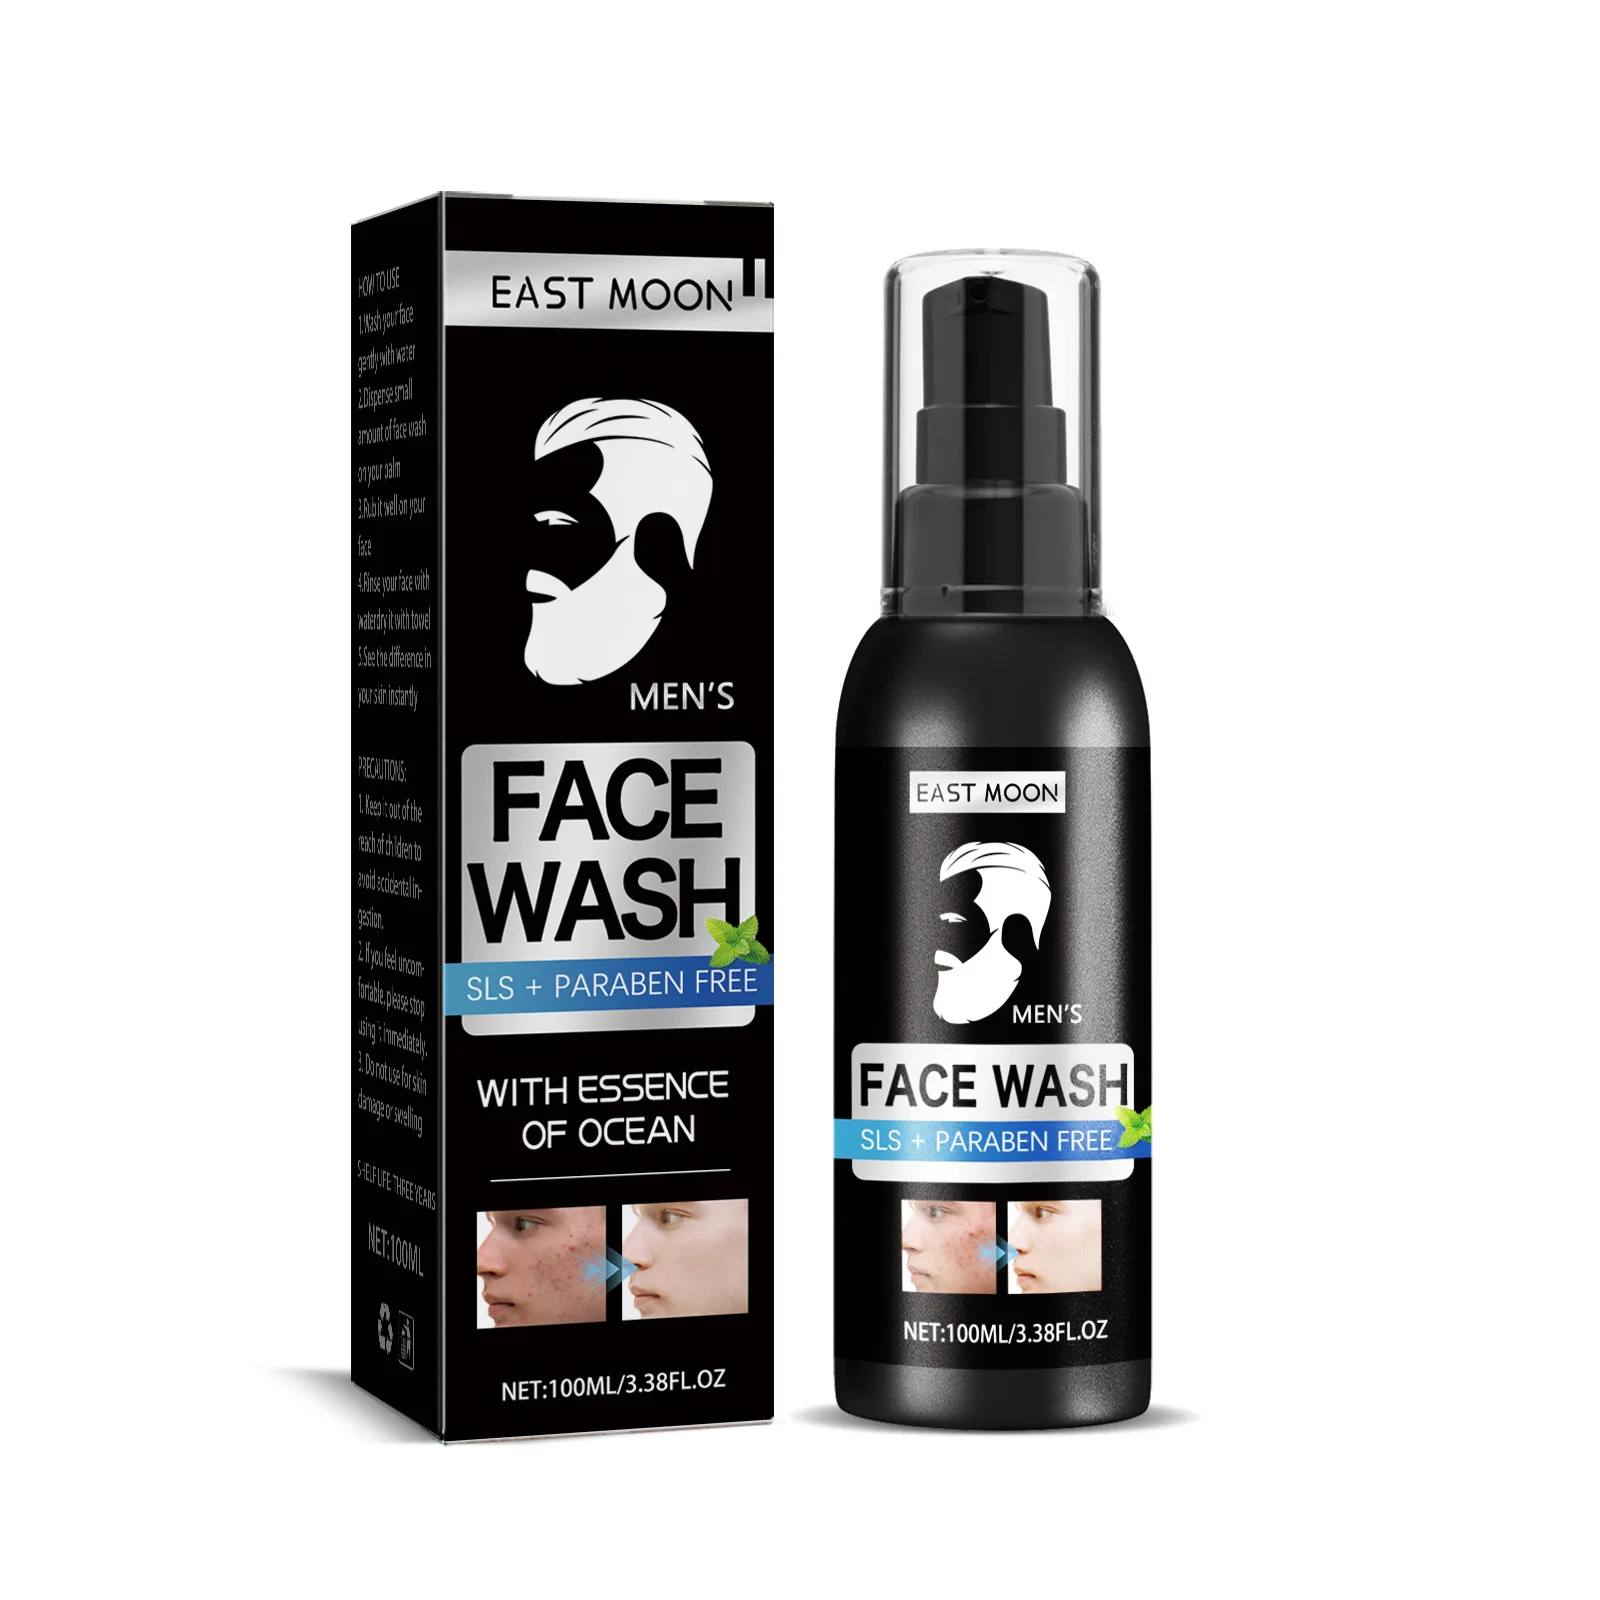 

Men's Facial Cleanser Acne Control Oil Control Moisturizing Deep Cleansing To Close Acne Blackheads Men's Skin Care Cleansing